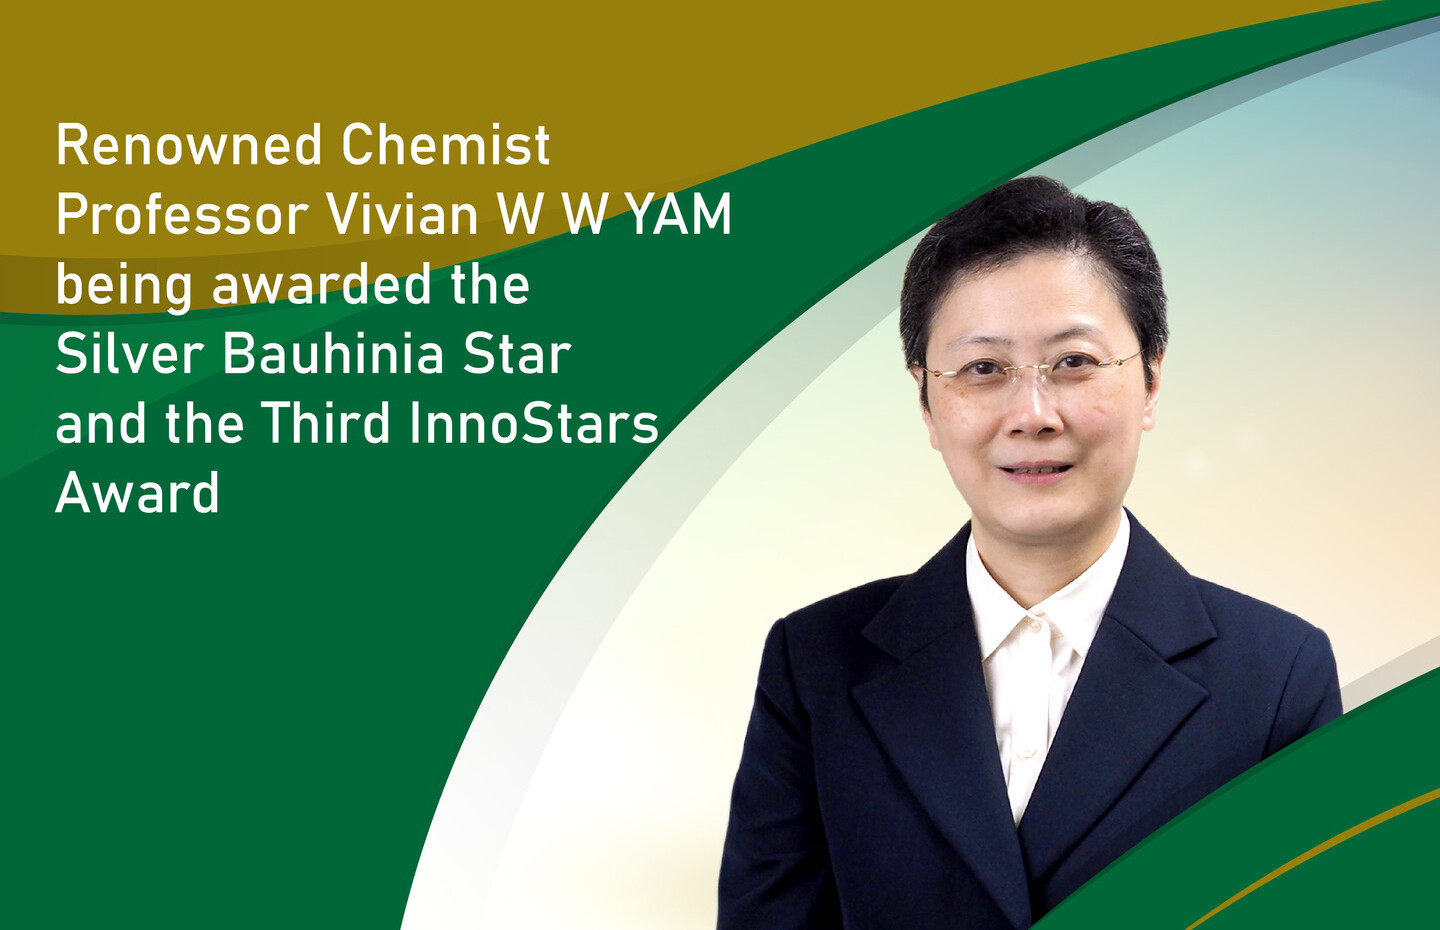 Renowned Chemist Professor Vivian Wing-Wah YAM being awarded the Silver Bauhinia Star